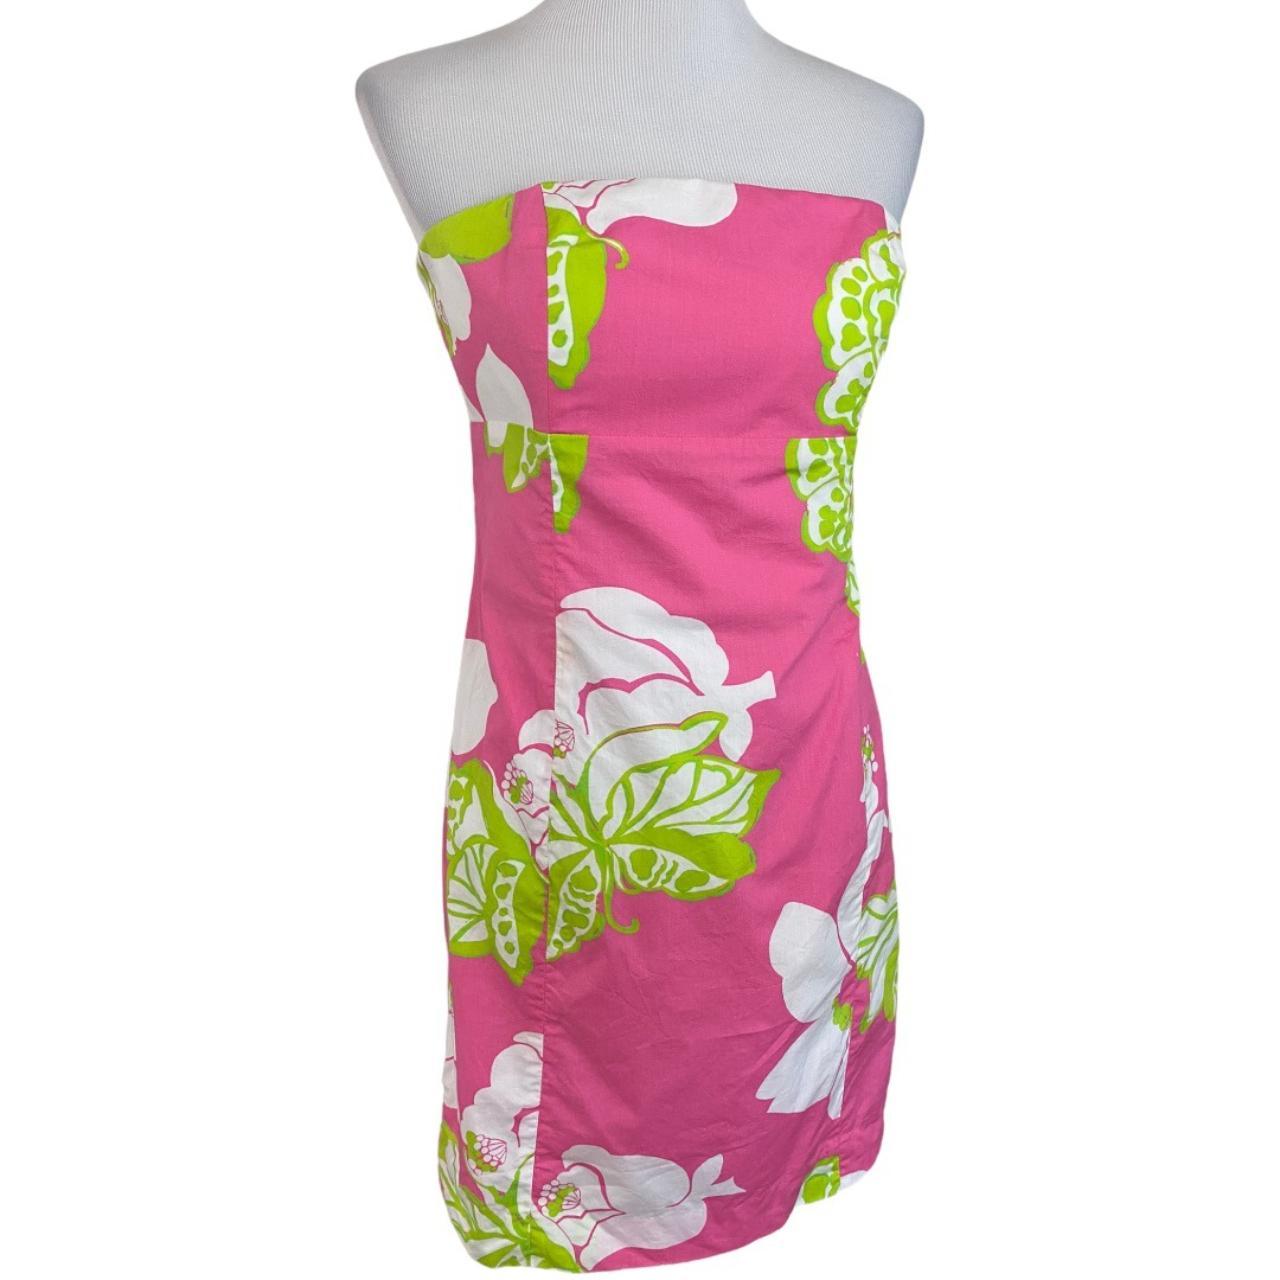 Lilly Pulitzer Women's Pink and Green Dress